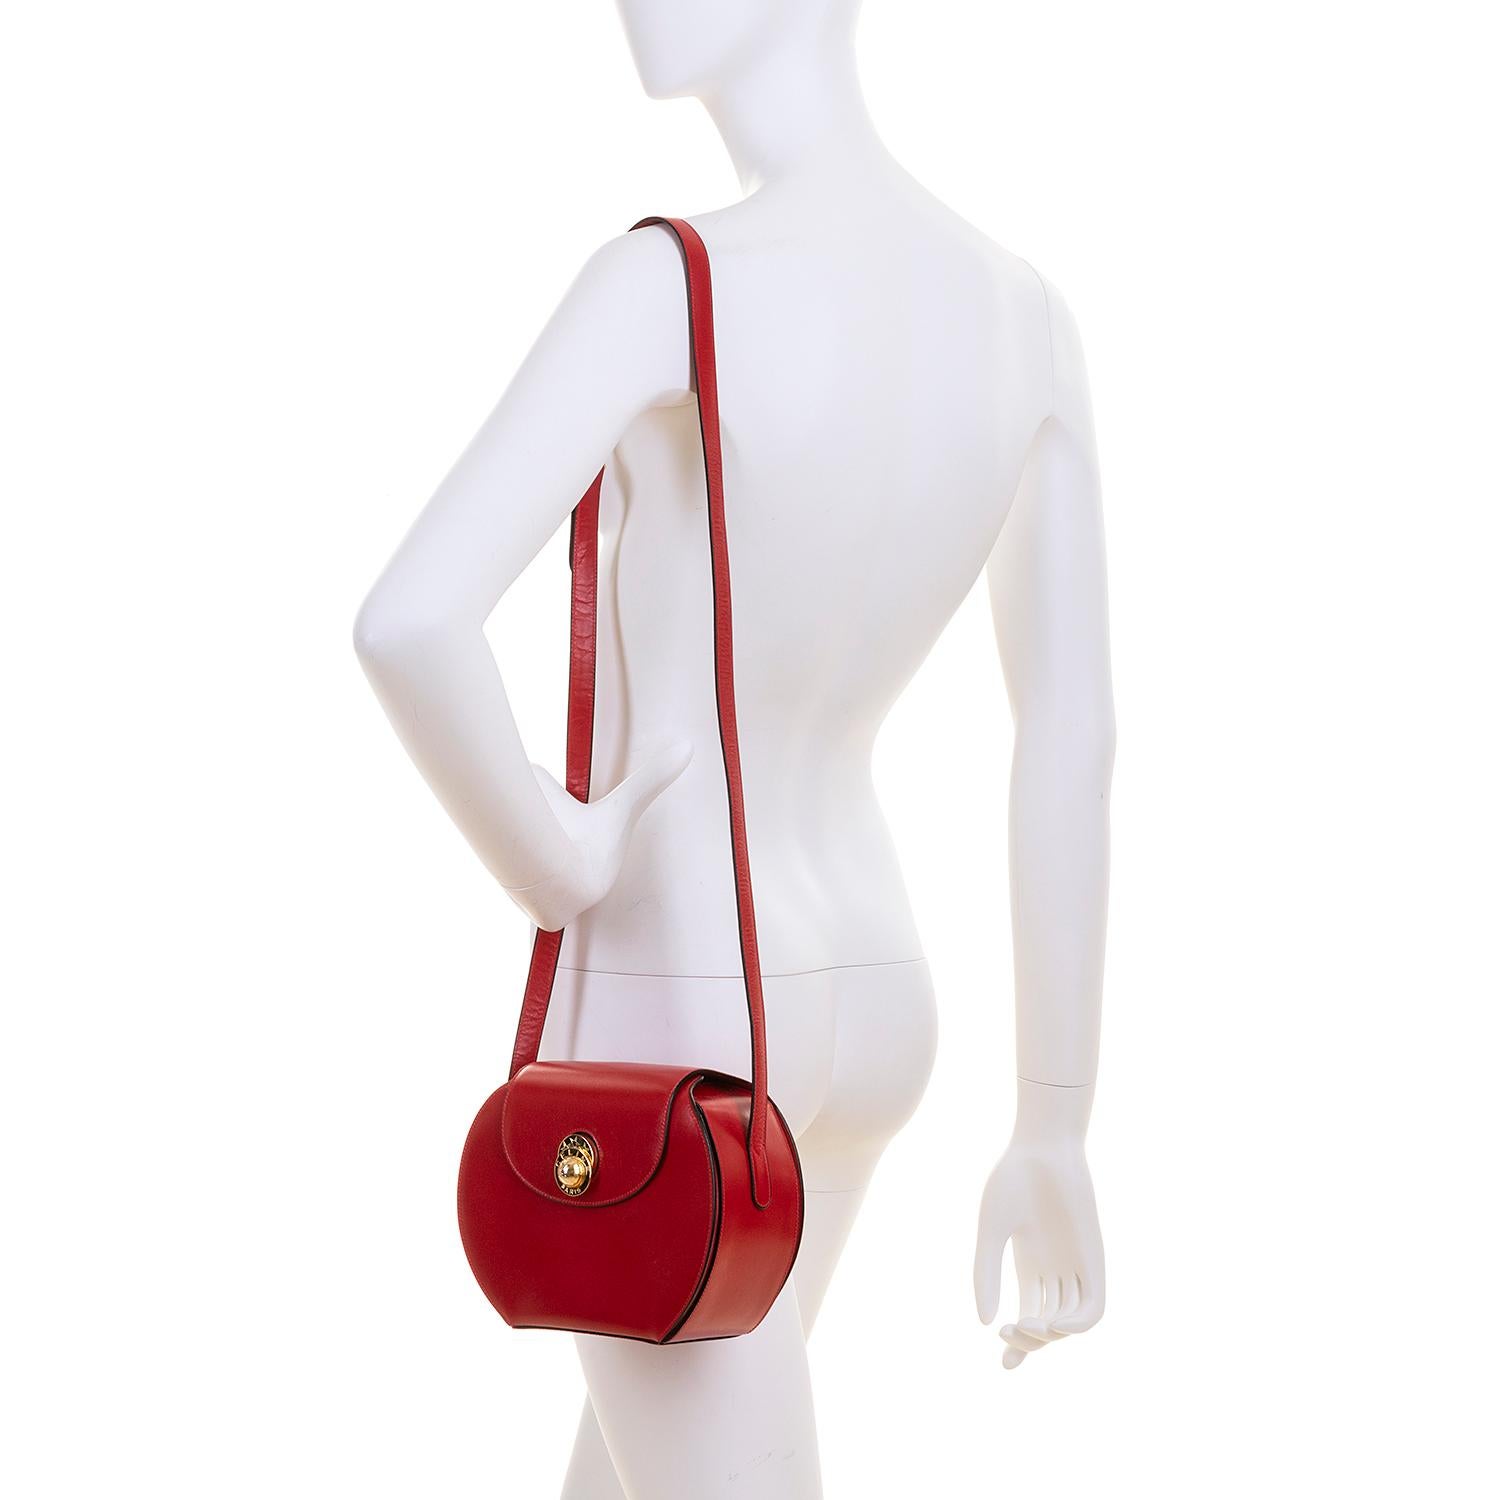 Gorgeous 2018 Celine Red Leather 'Star' Bag. This high quality Shoulder Bag by Celine of Paris, is in pristine condition - finish in Red Box leather accented with gold hardware. Beautifully made, the bag with it's expanding sides, is deceptively